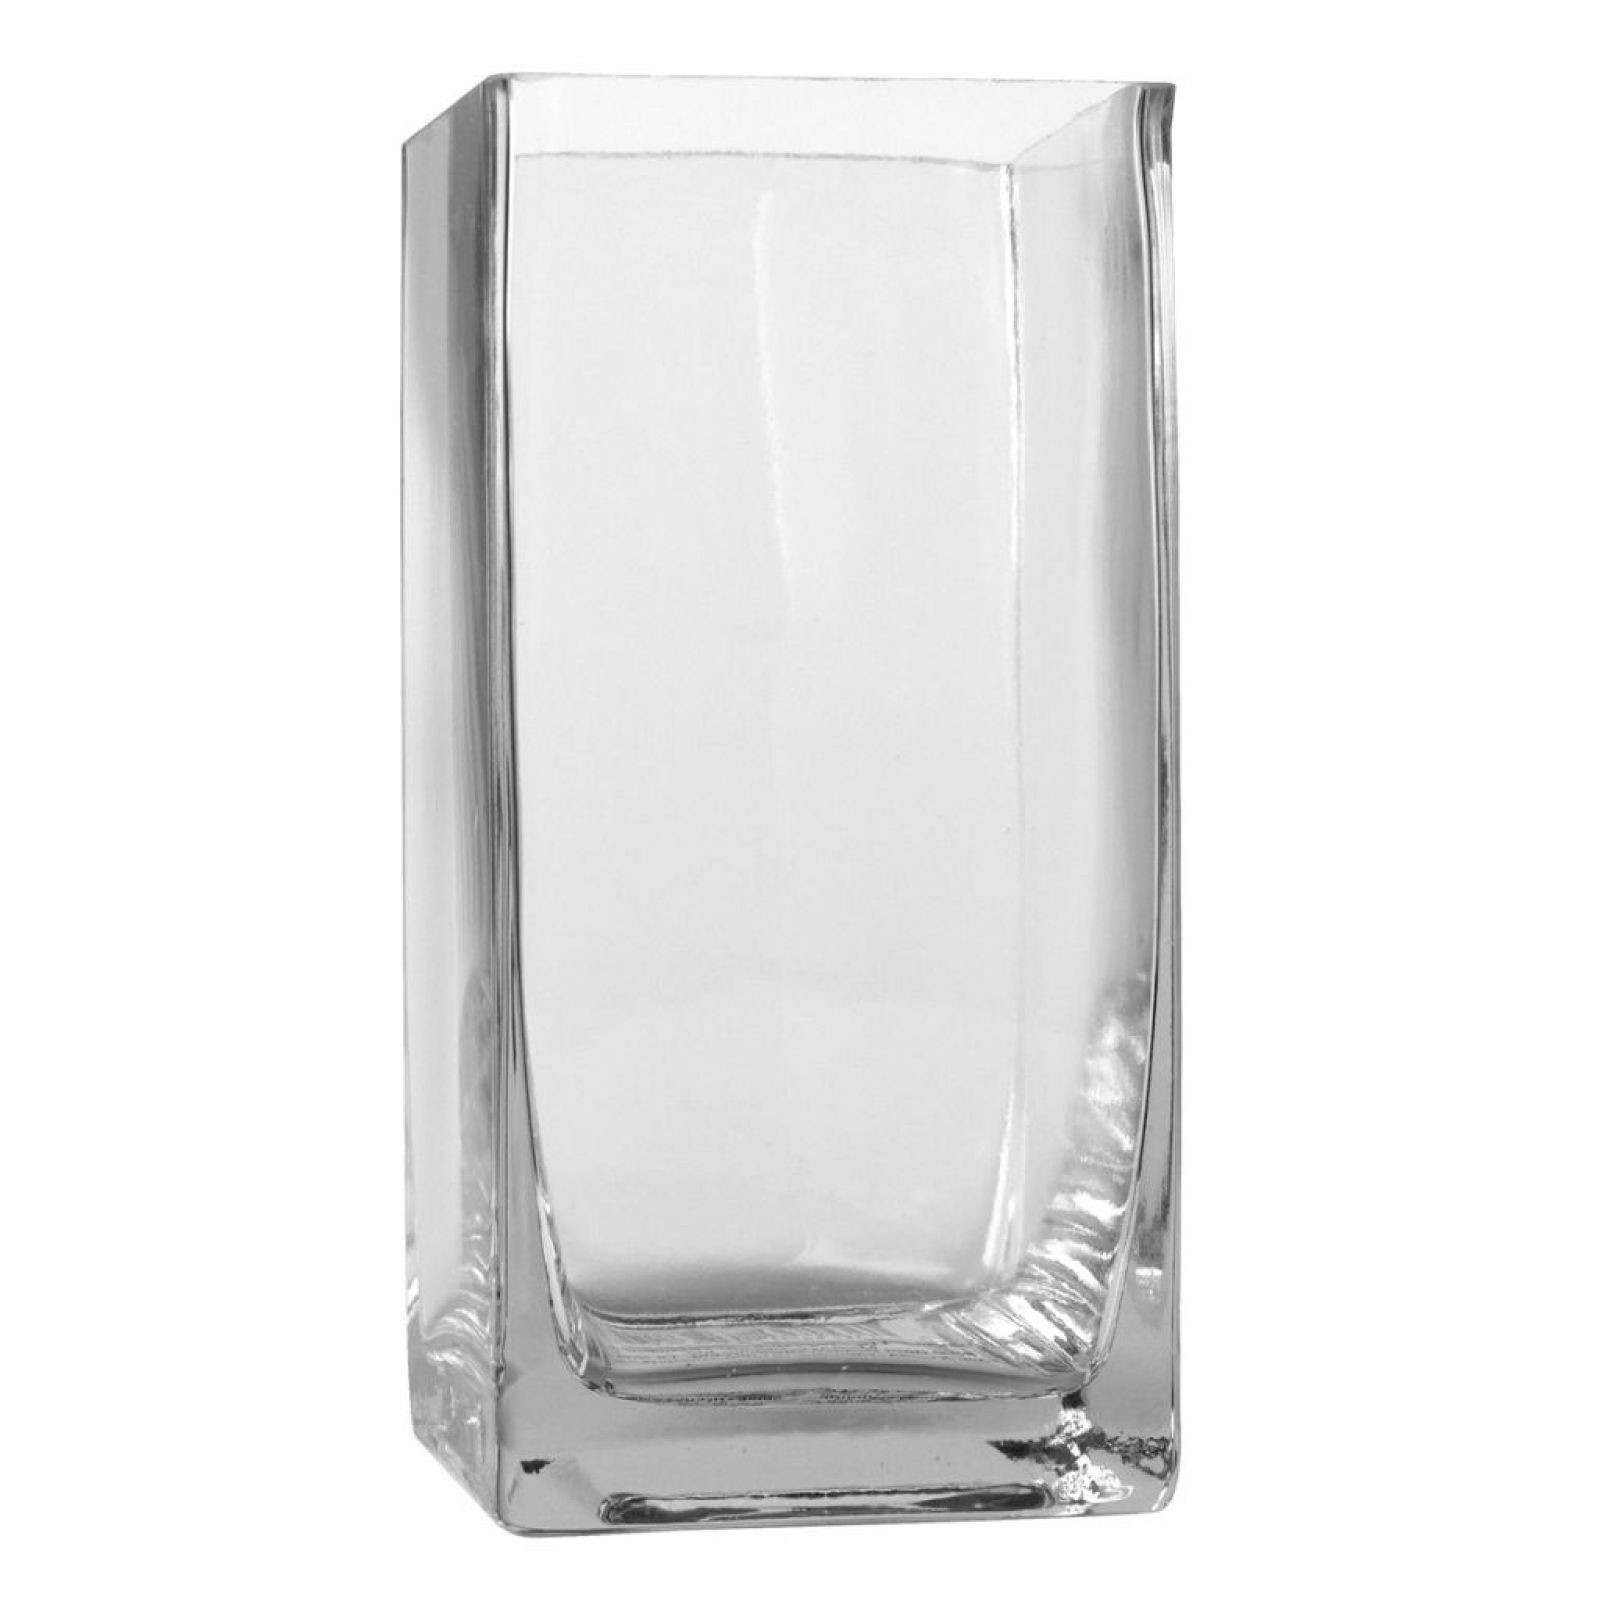 25 Perfect 6 Inch Glass Cylinder Vase 2024 free download 6 inch glass cylinder vase of ashland tall cube glass vase cube and glass within ashlanda tall cube glass vase 6